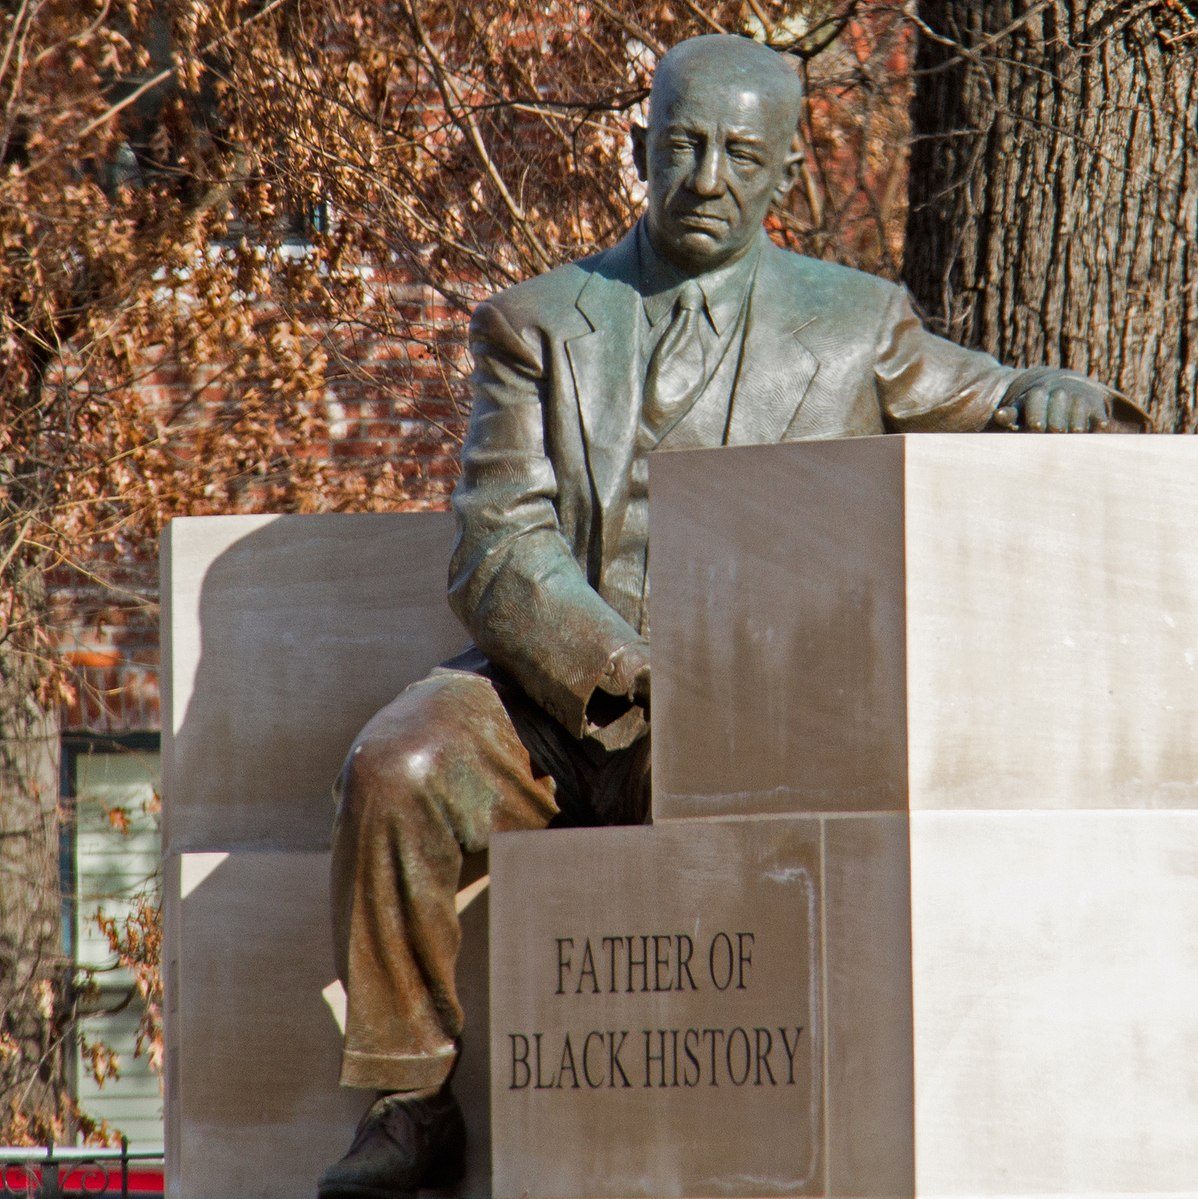 Carter G. Woodson Quotes to Memorialize Black History Month